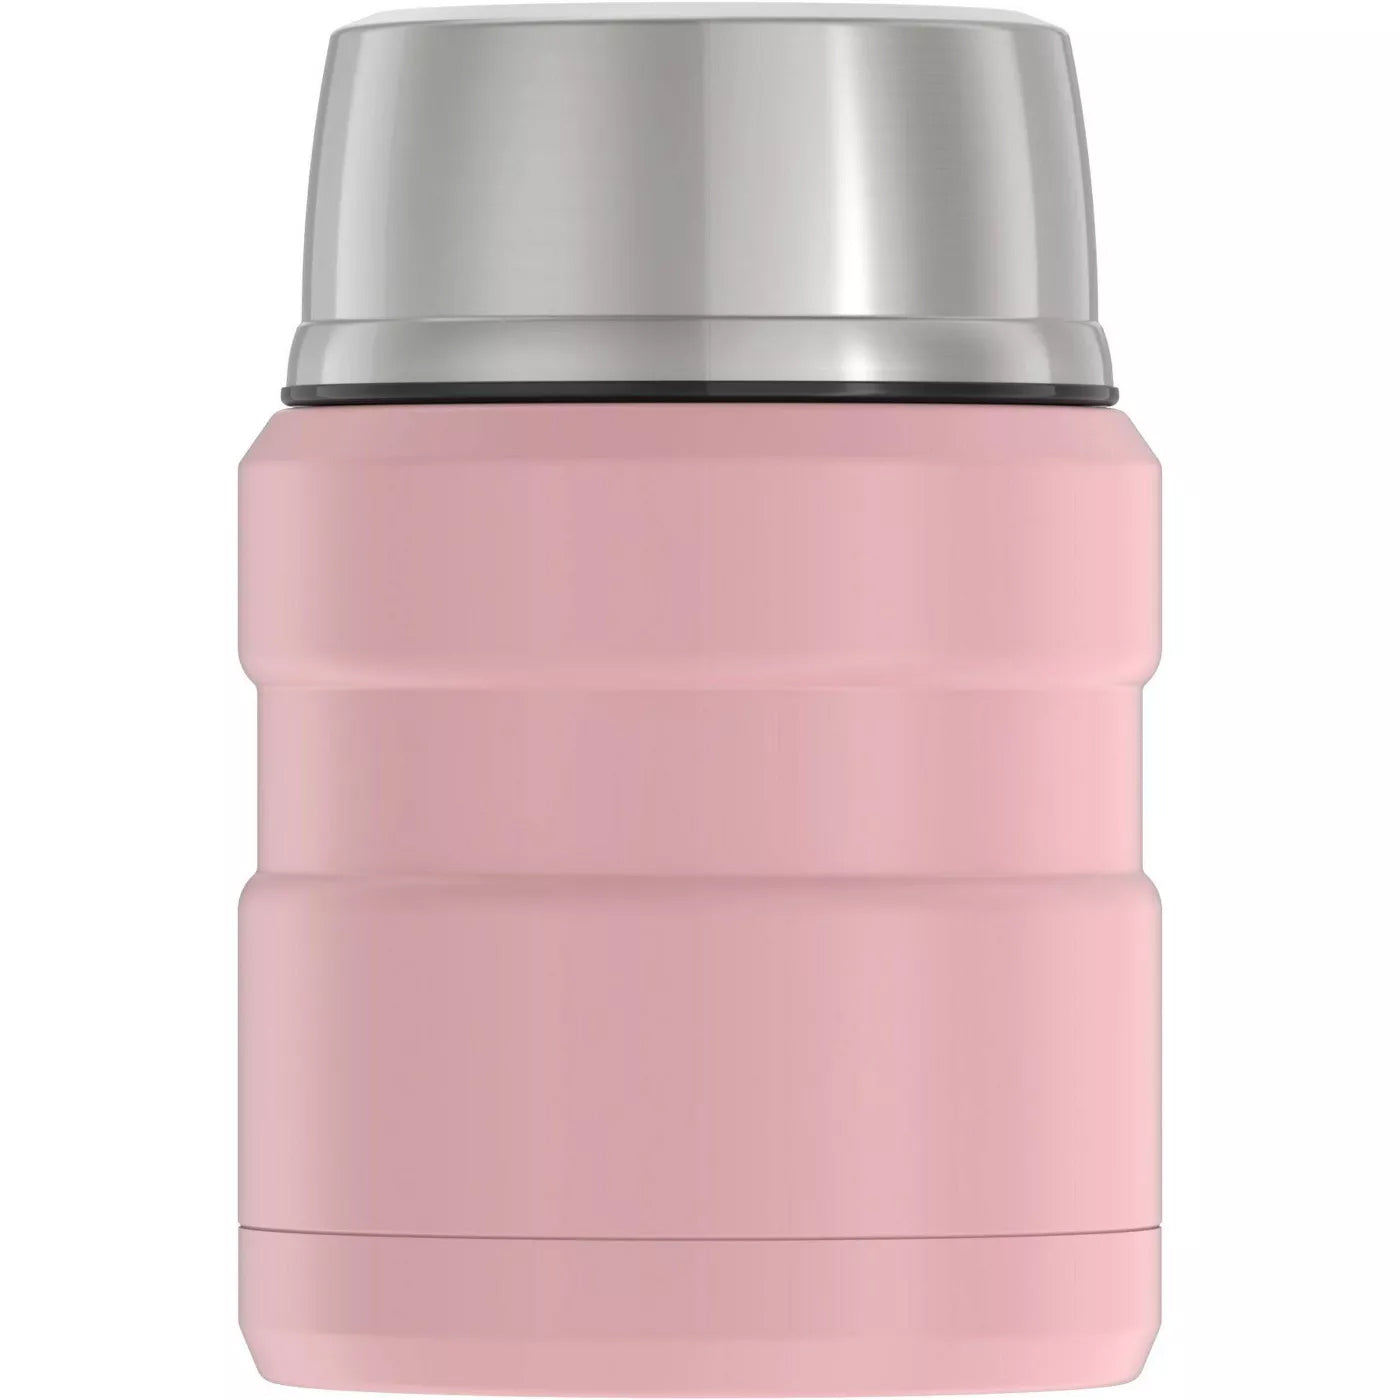 THERMOS Stainless King Vacuum-Insulated Compact Bottle, 16 Ounce, Matte  Steel